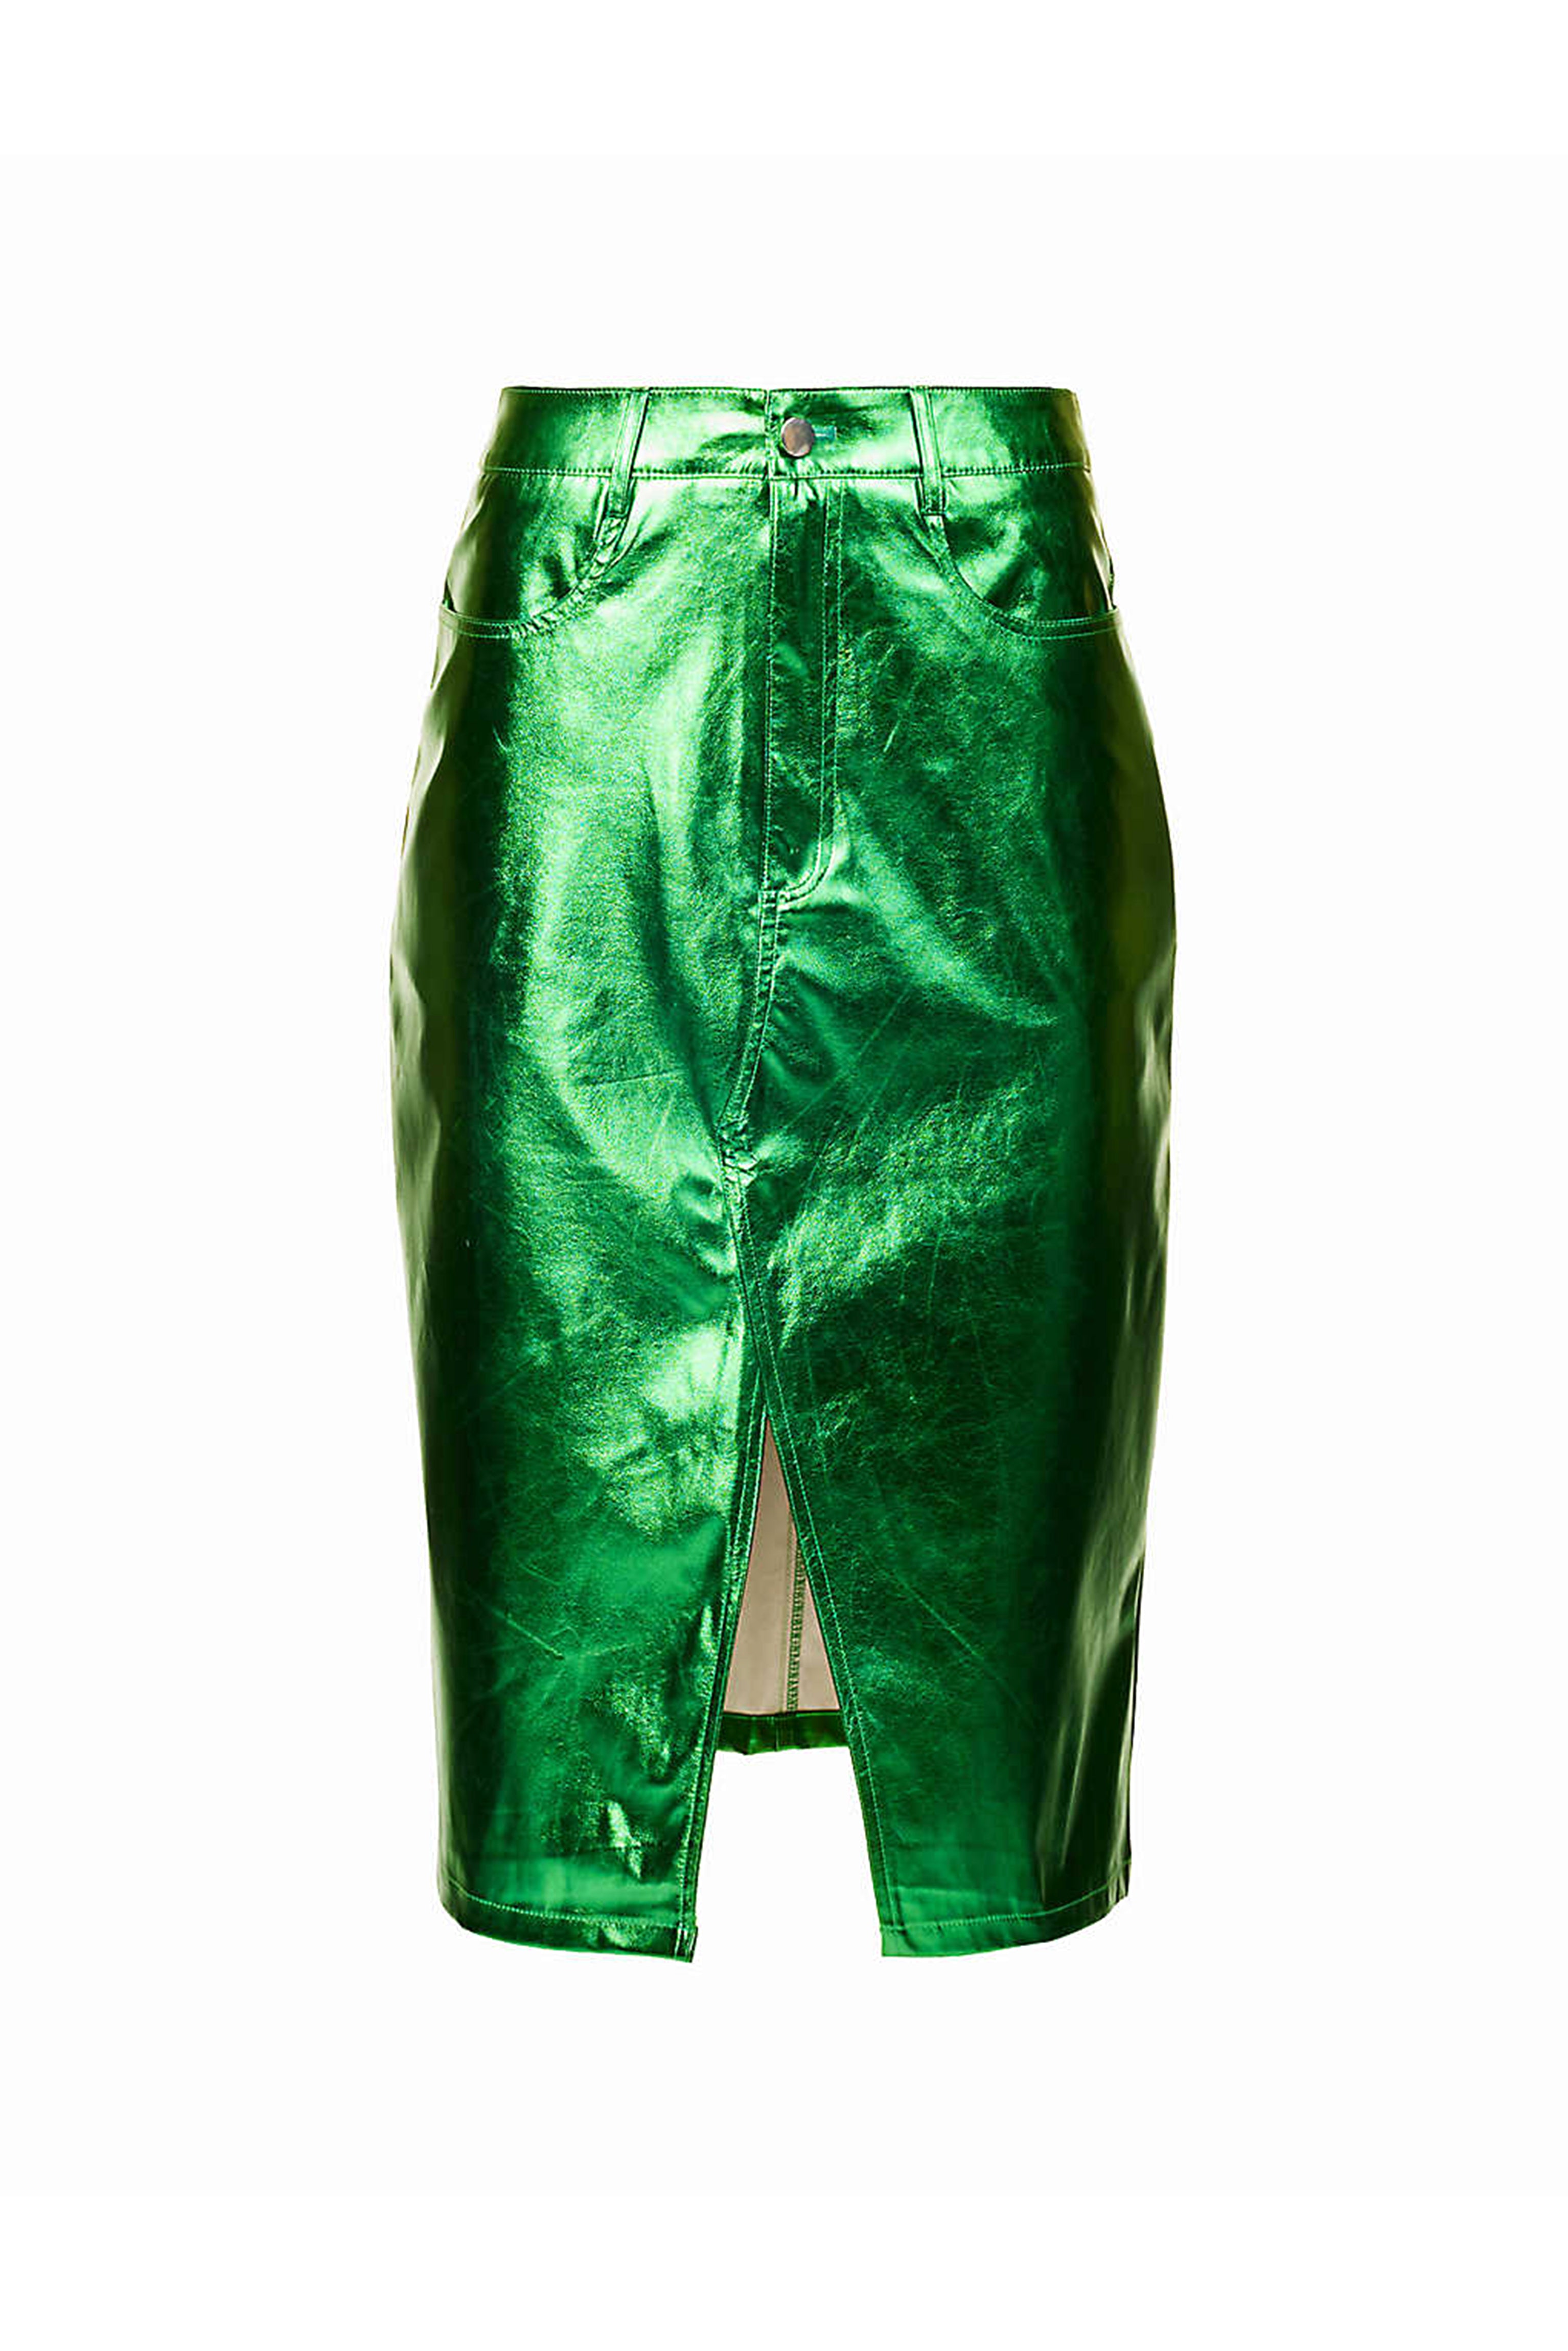 Lupe Shiny Green High Waisted Metallic Faux Leather Pencil Midi Skirt